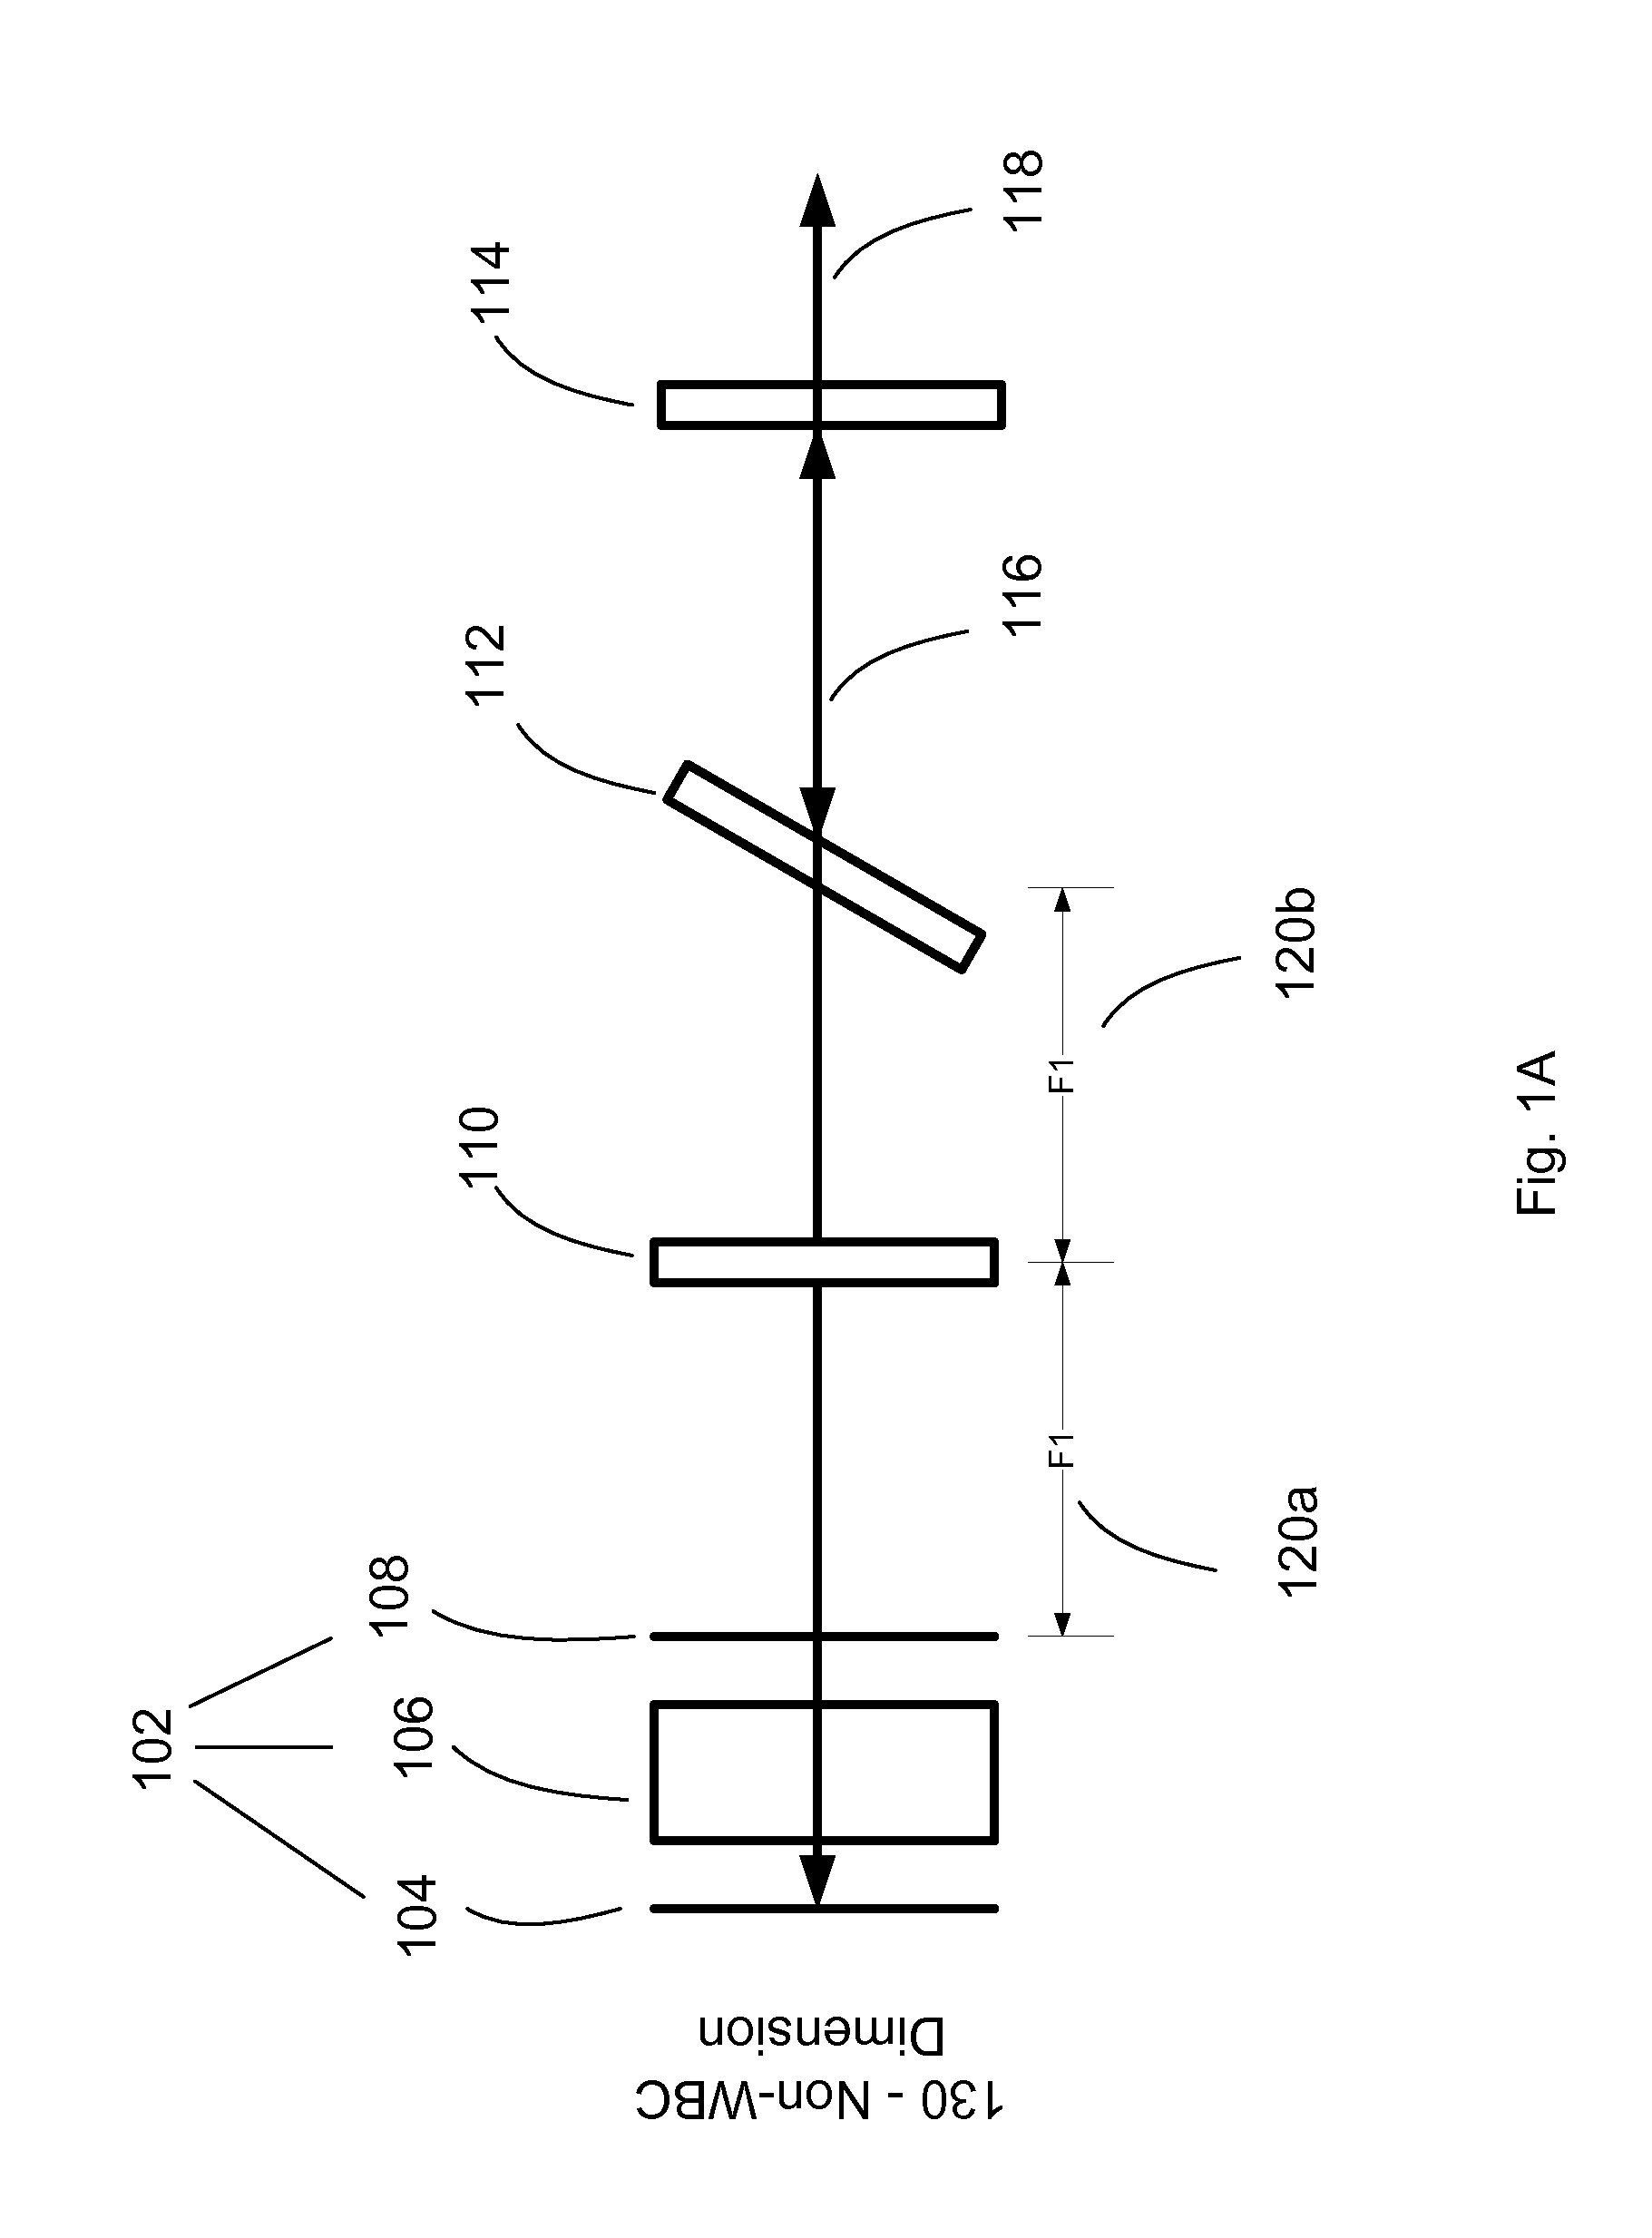 Optical cross-coupling mitigation system for multi-wavelength beam combining systems